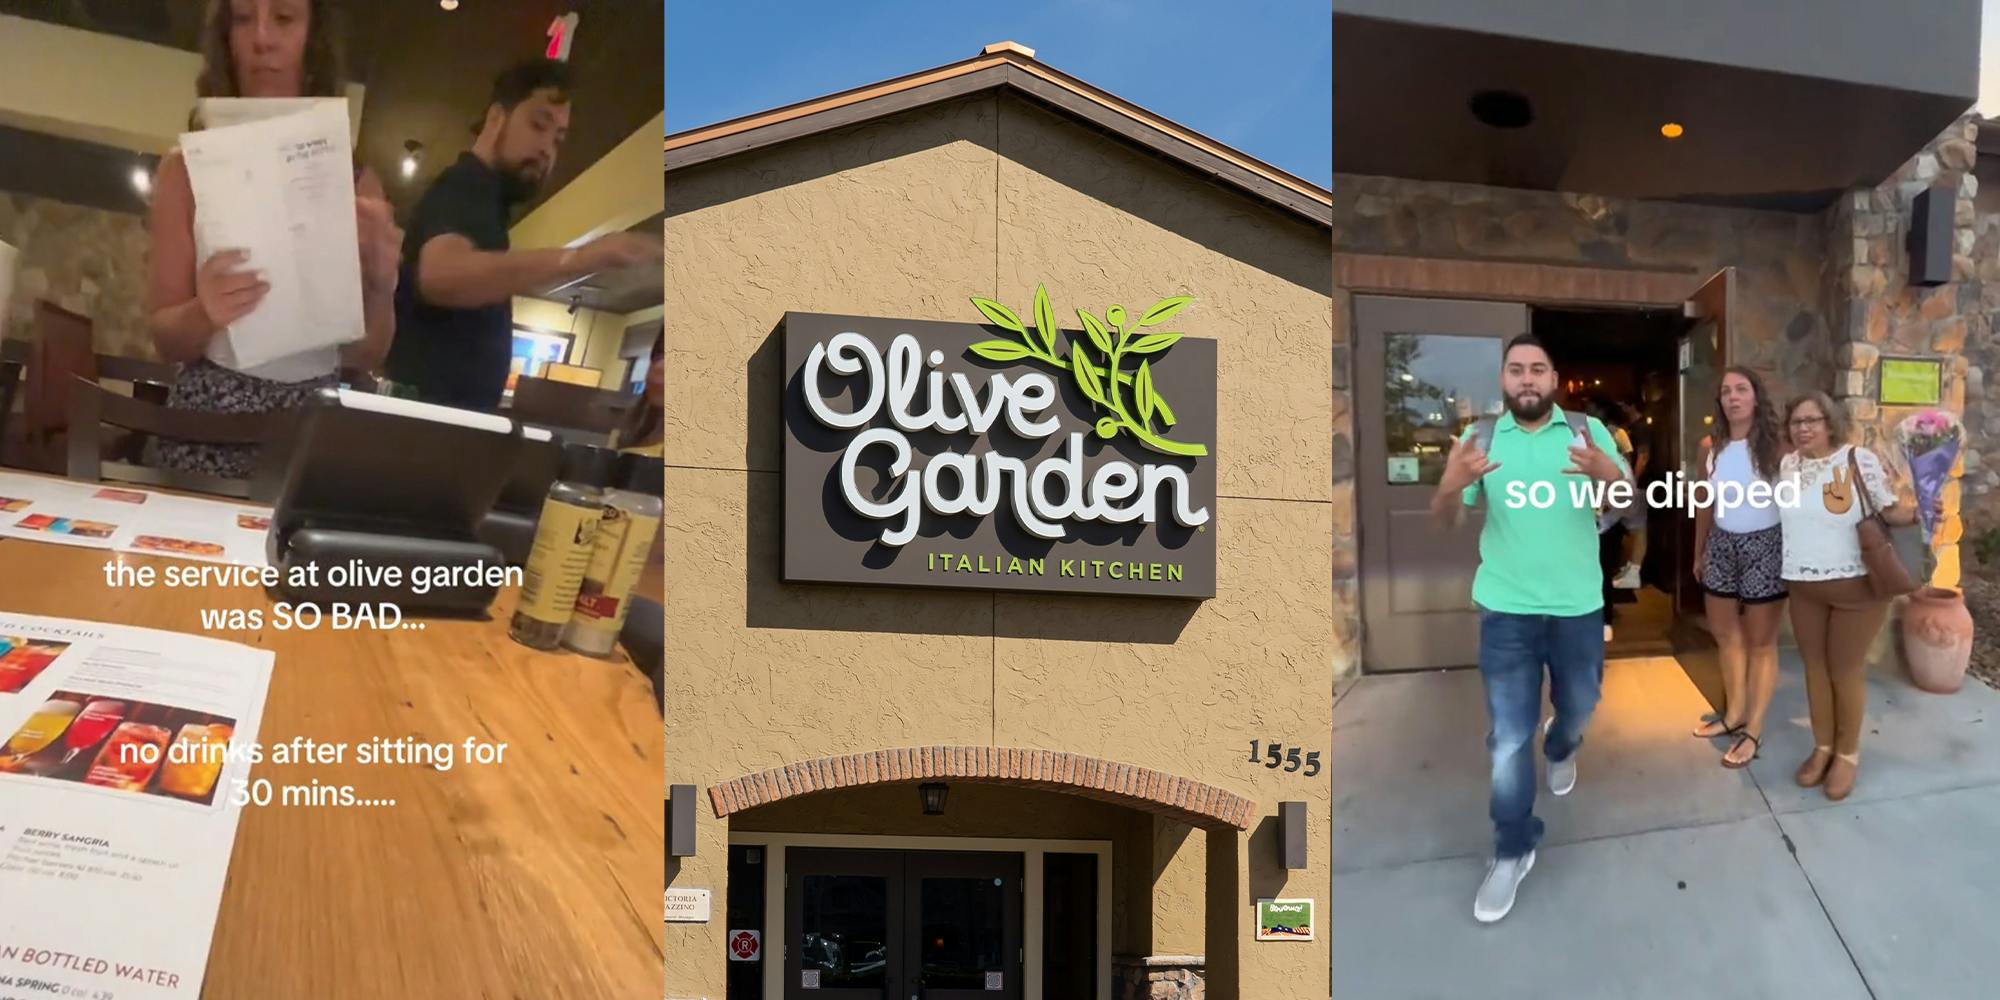 Olive Garden Customers Leave Restaurant Due to ‘Bad Service’